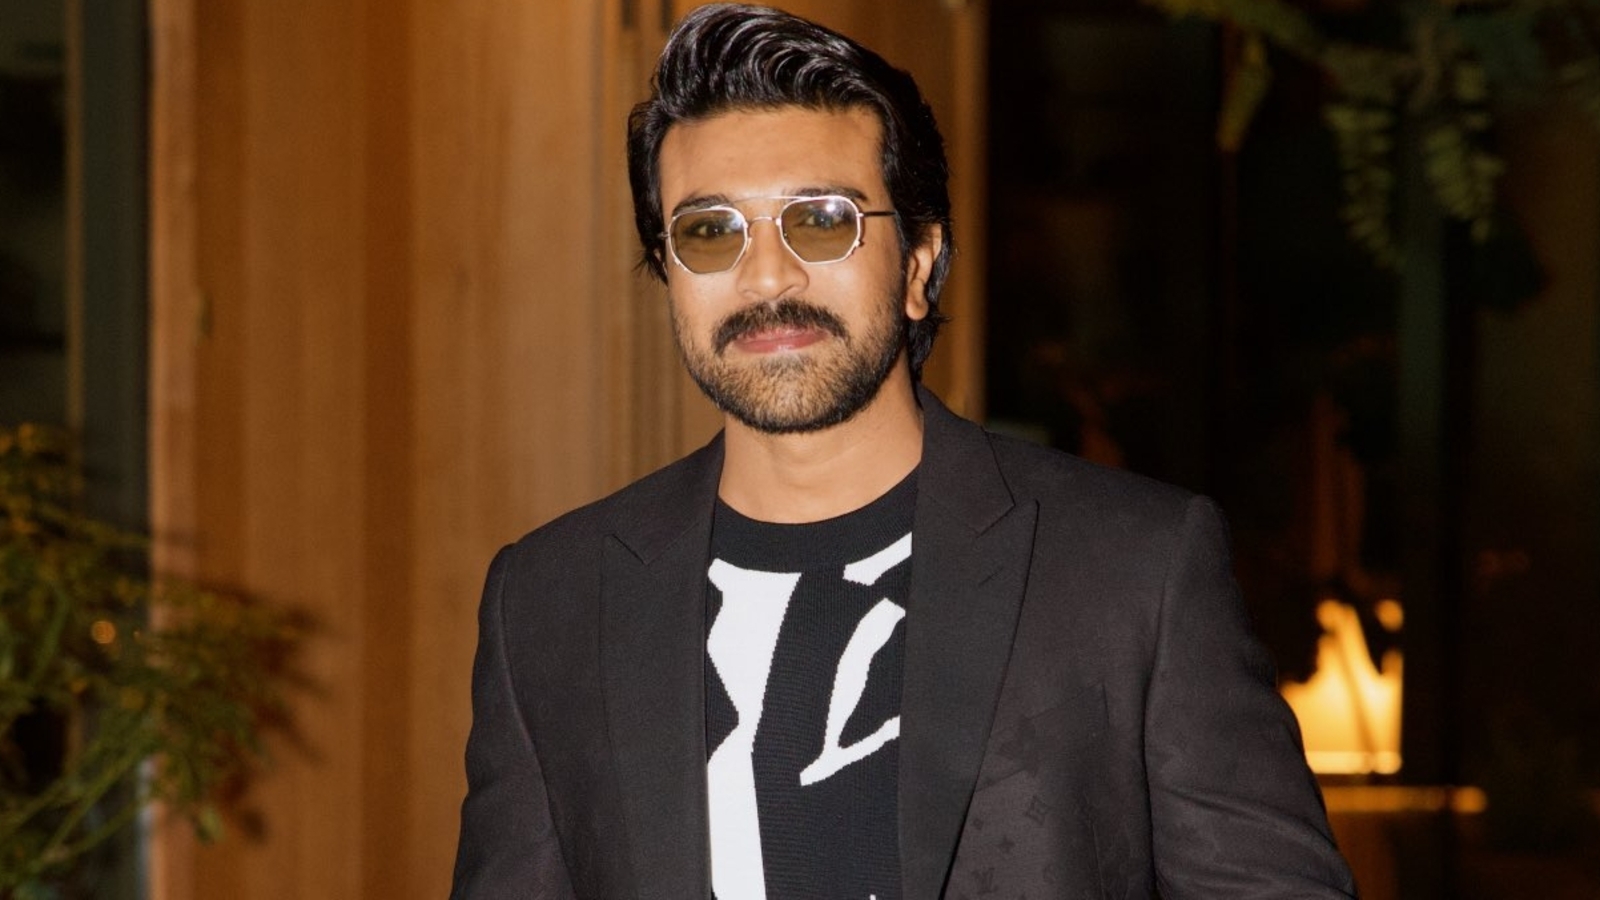 Ram Charan attends star-studded Los Angeles party ahead of Golden ...